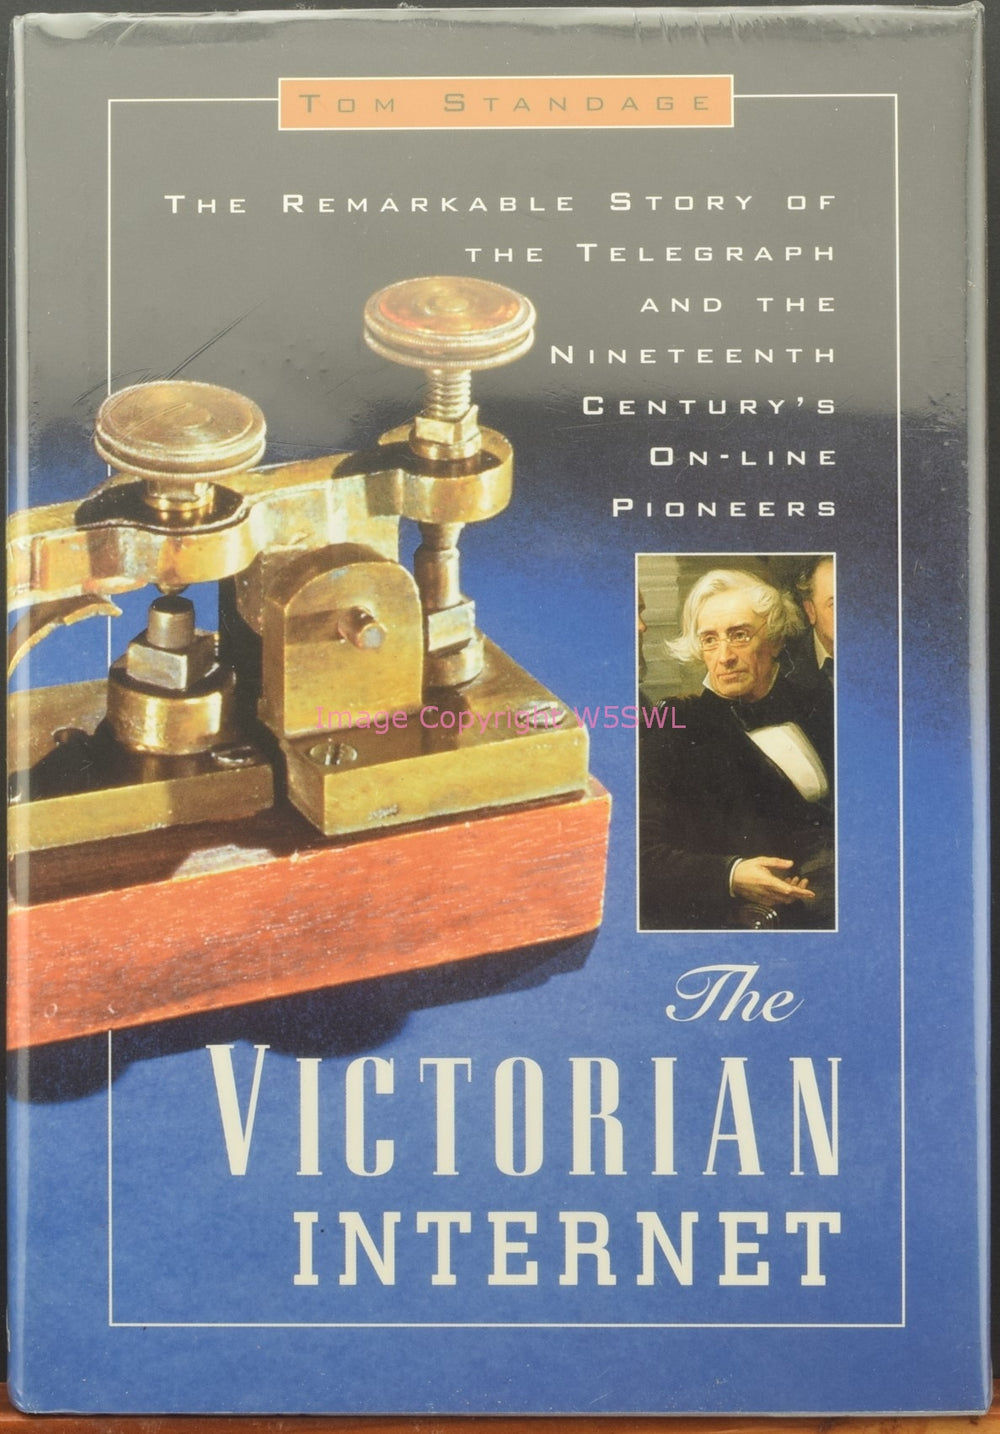 The Victorian Internet by Tom Standage Hard Bound - Dave's Hobby Shop by W5SWL